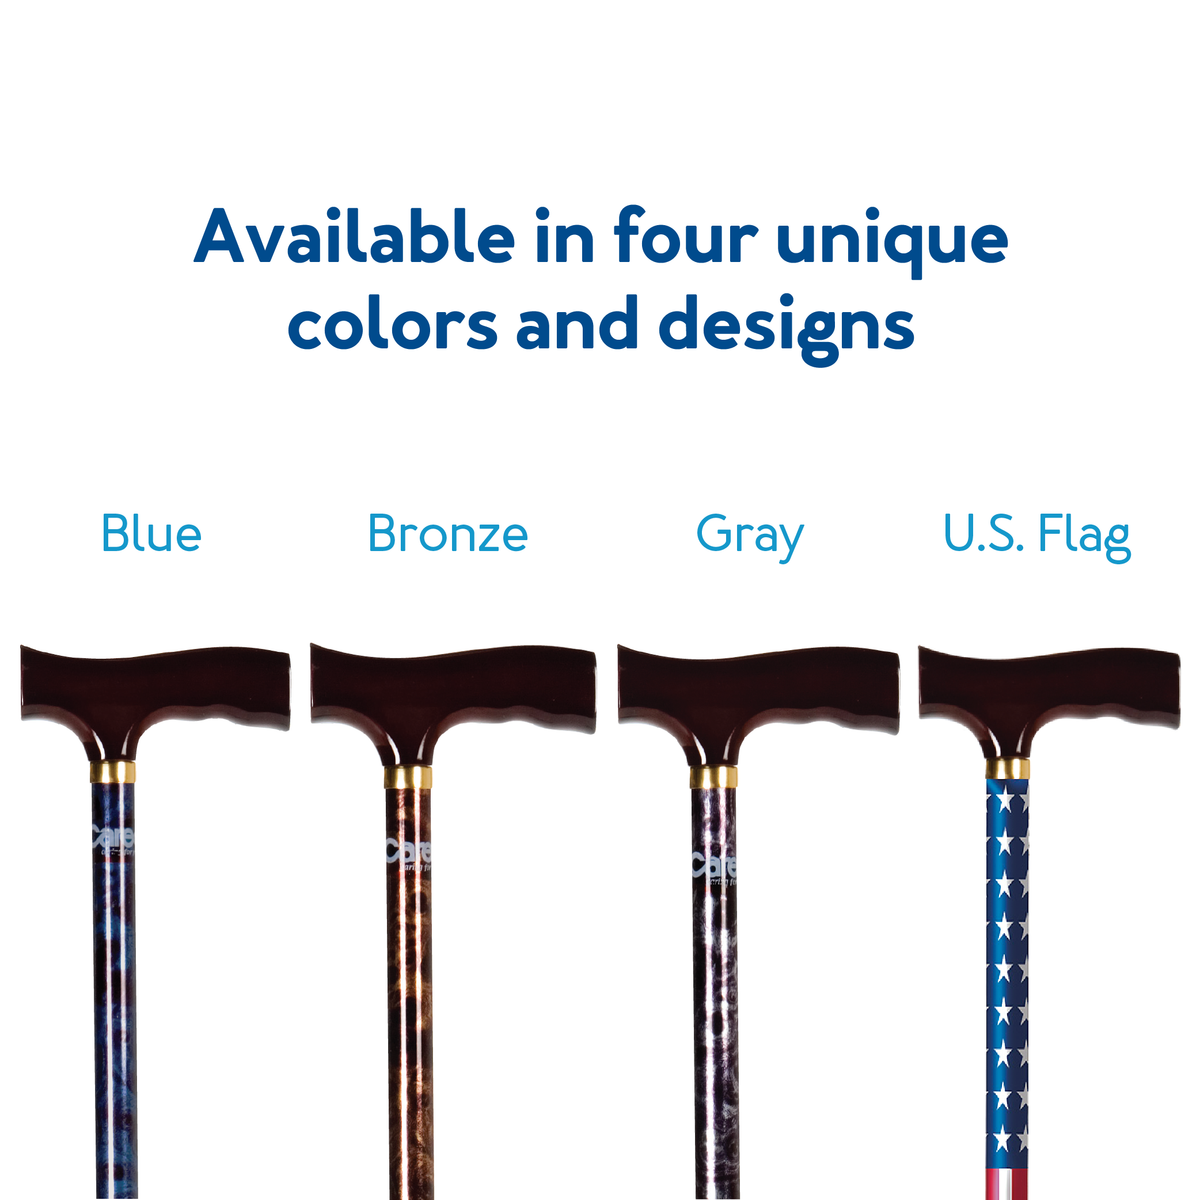 The Carex Designer Derby Cane’s colors: blue, bronze, gray, and US flag